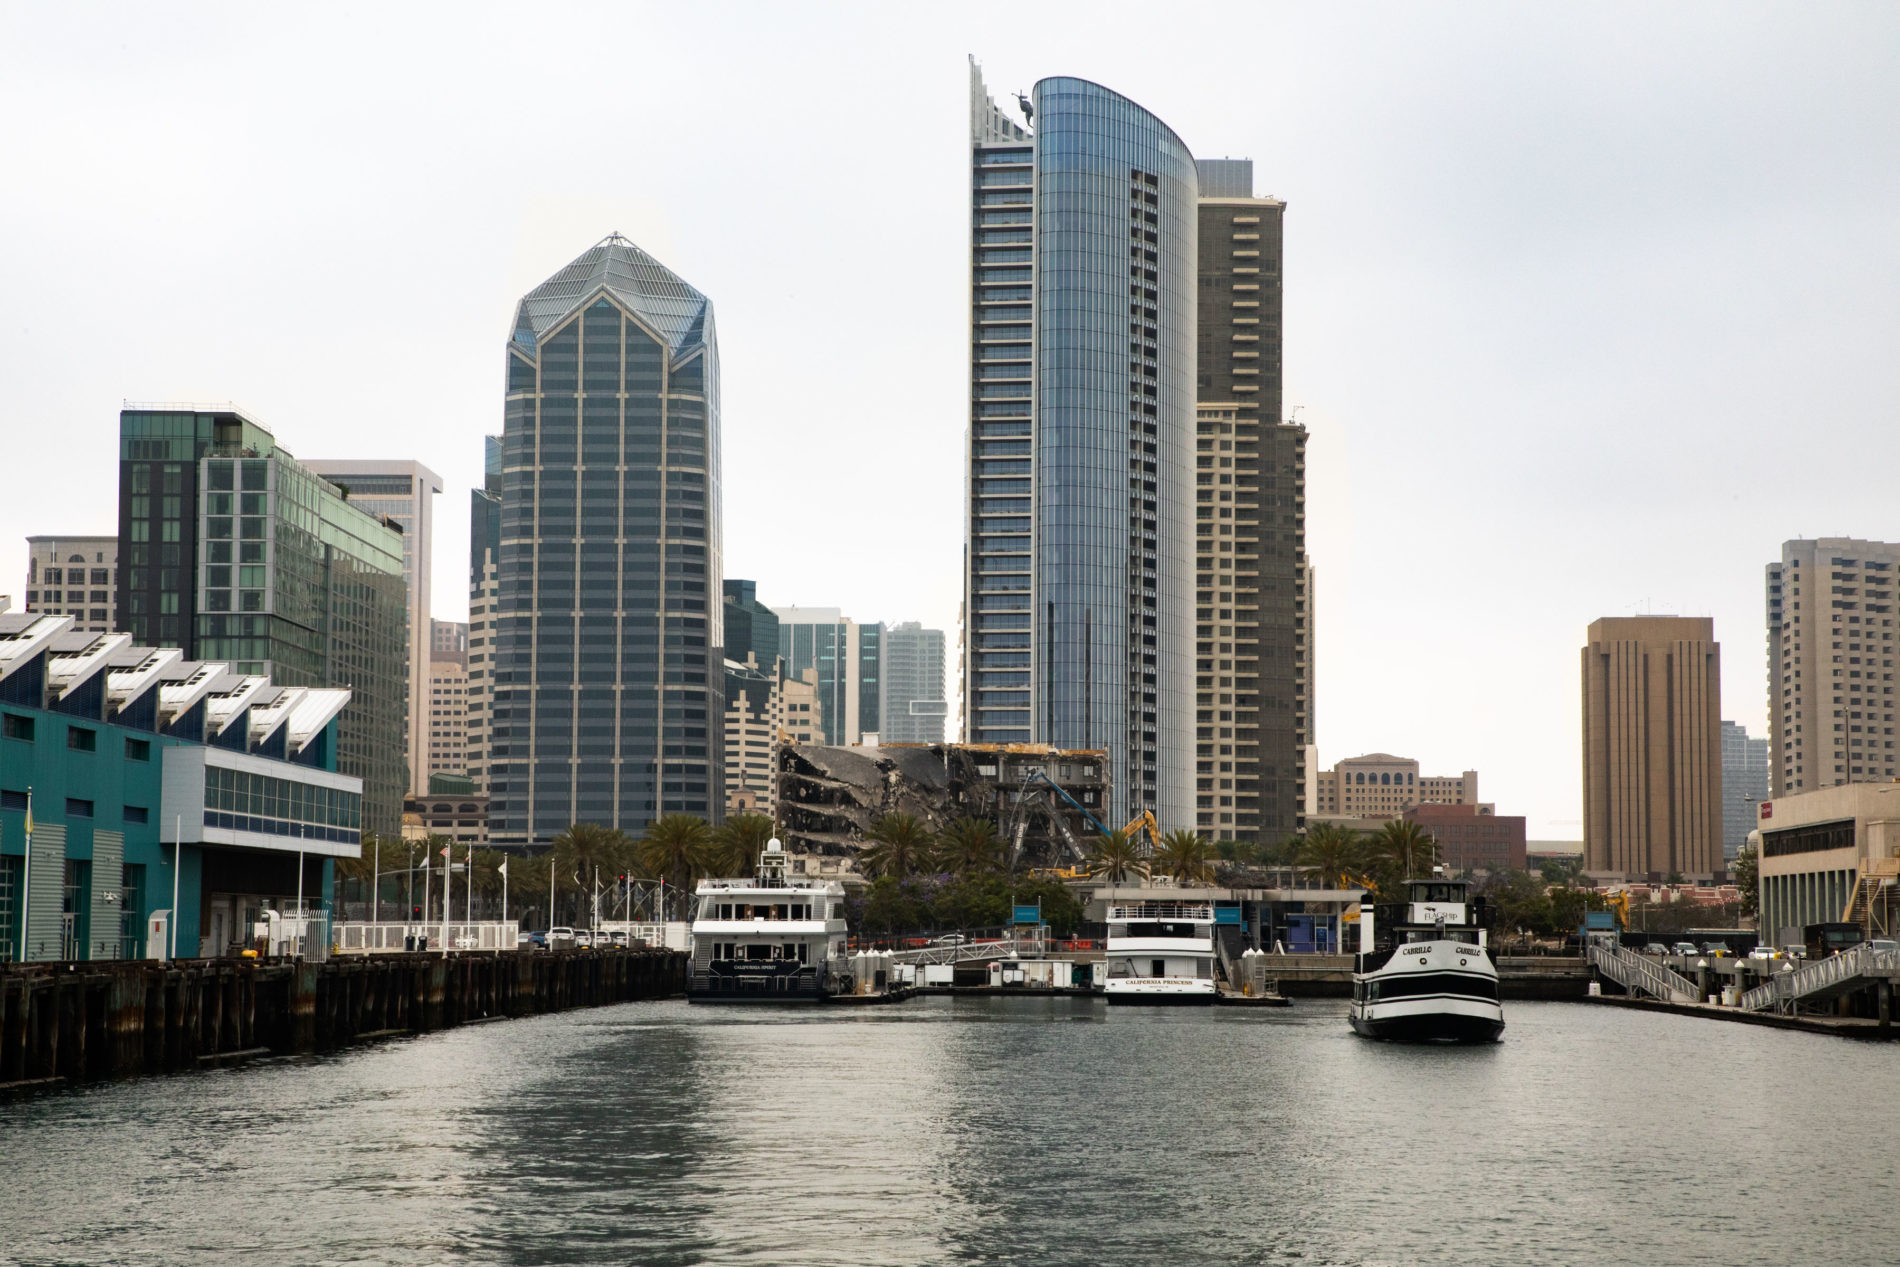 A view of San Diego from the water. San Diego is a must stop on the I-5 road trip.